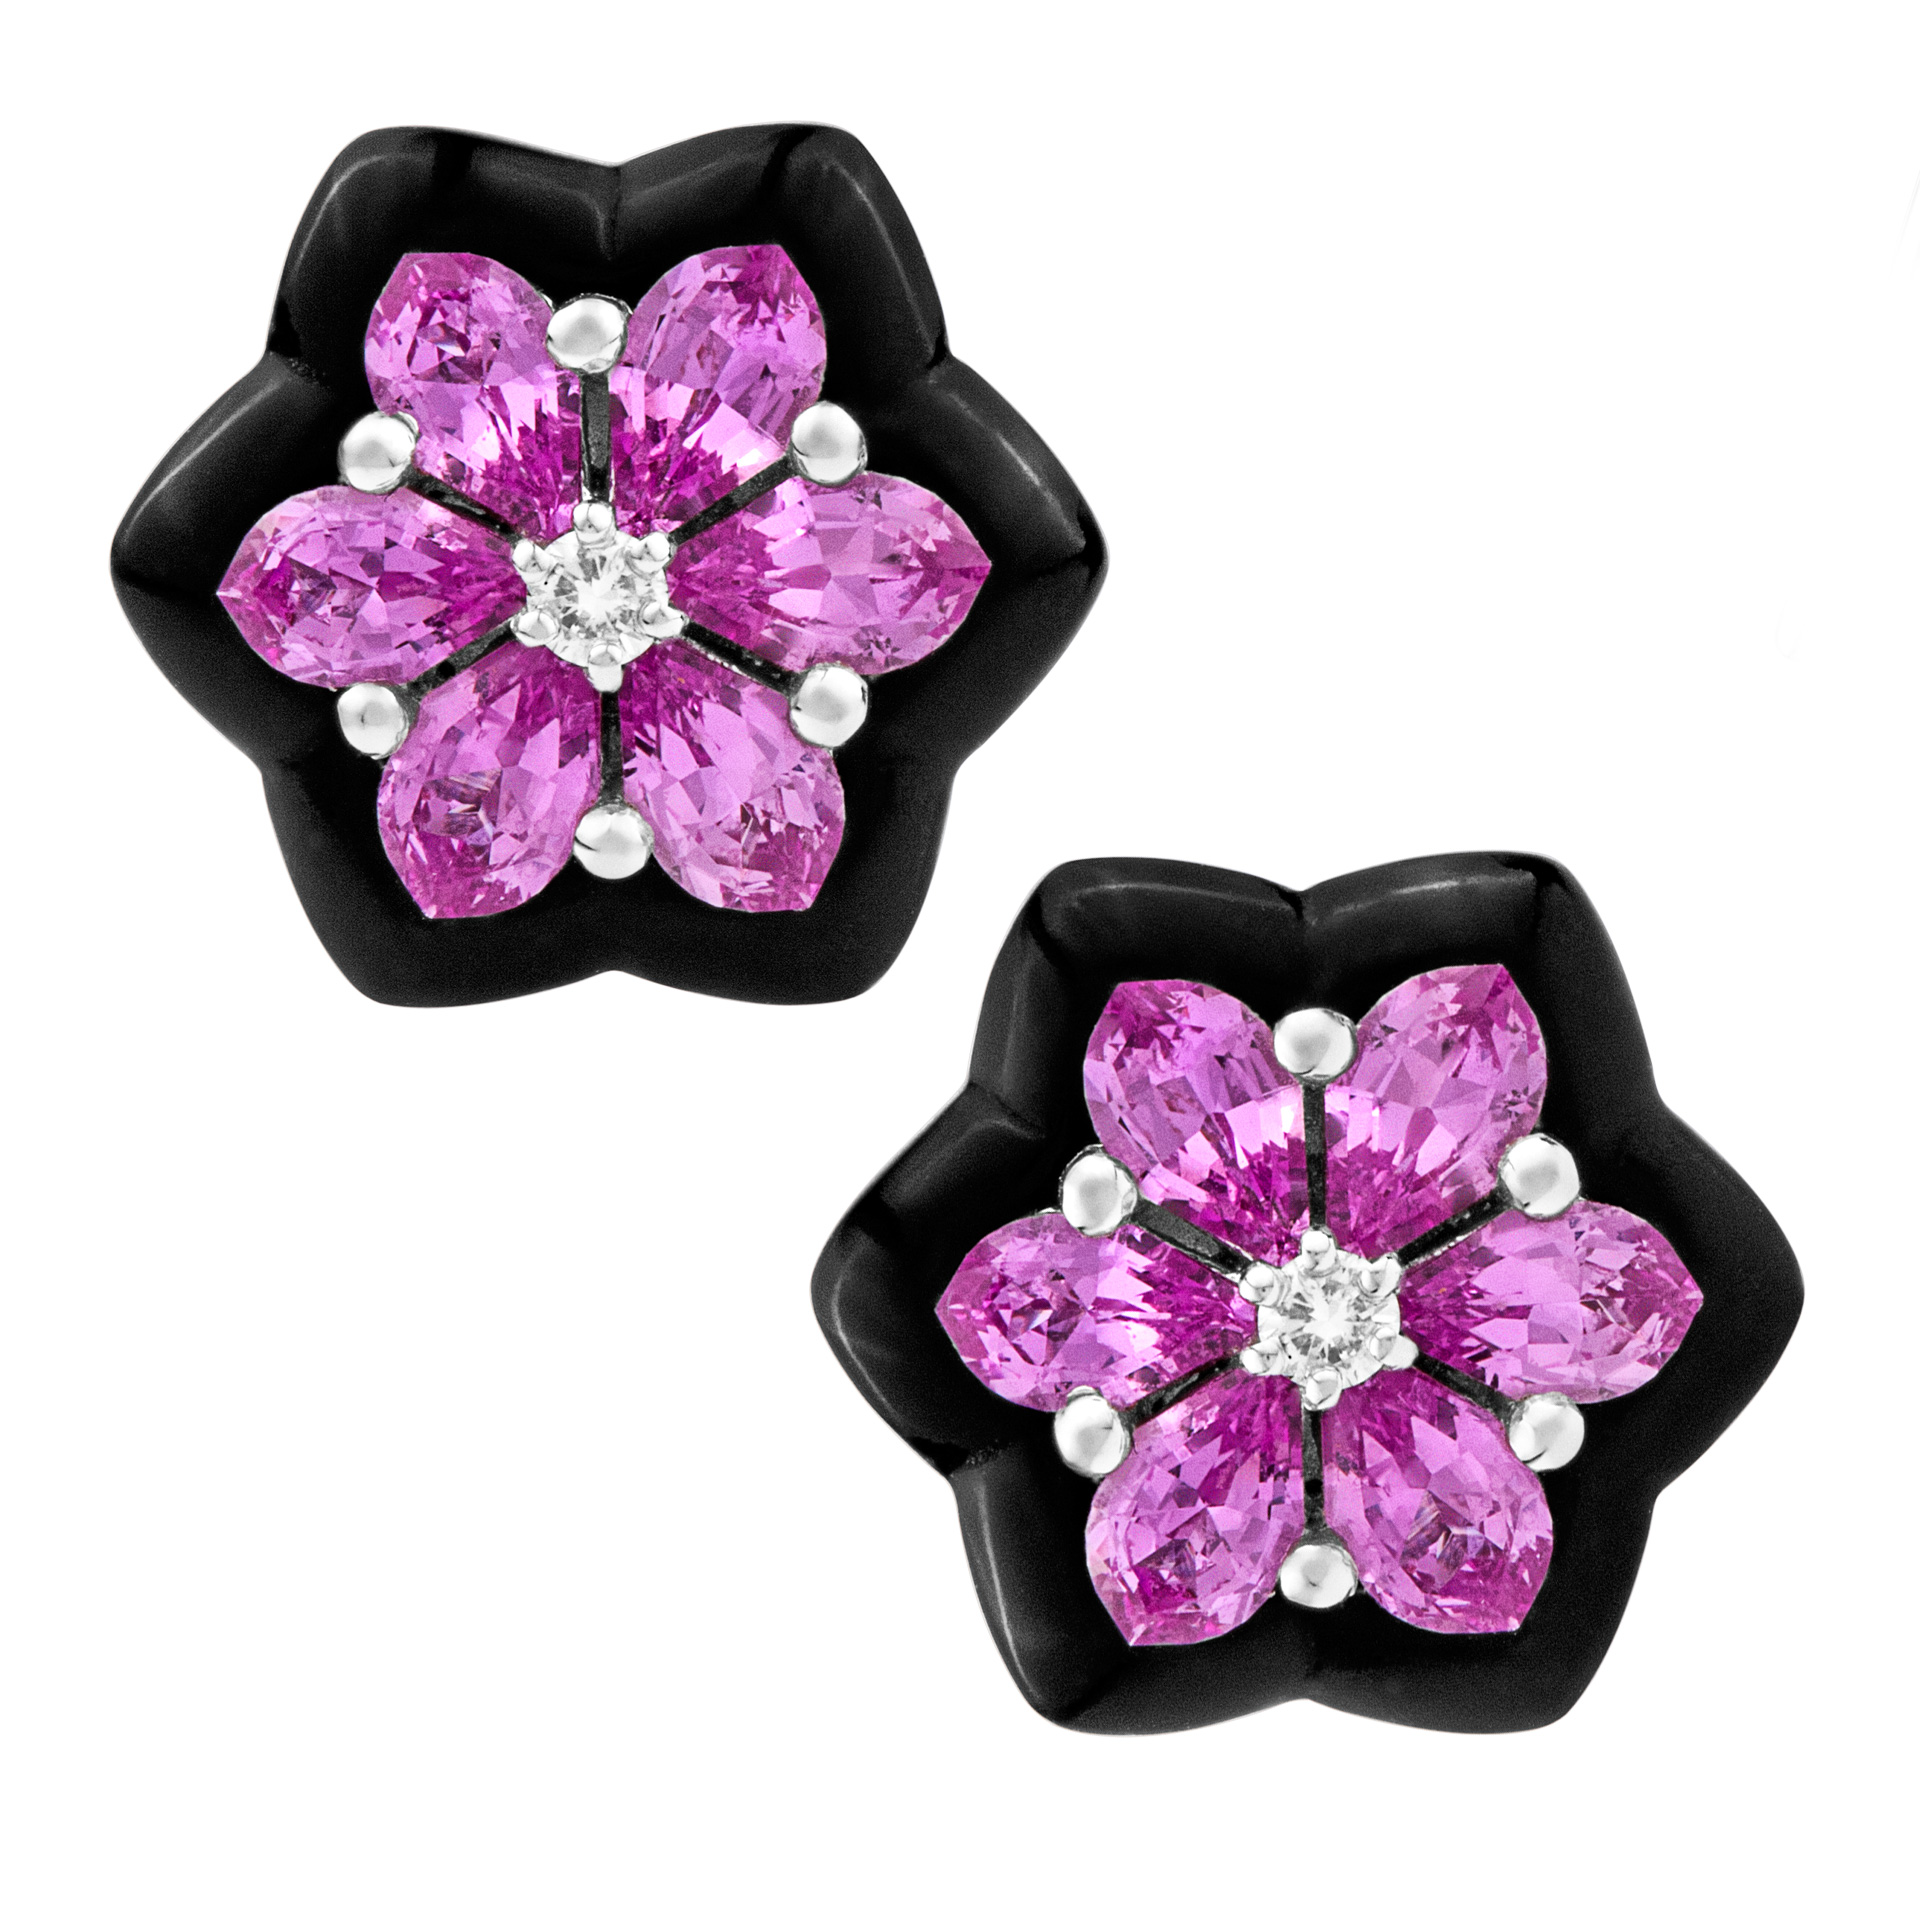 Pink sapphire & onyx earrings with diamond center. 2.00 carats in sapphires image 1